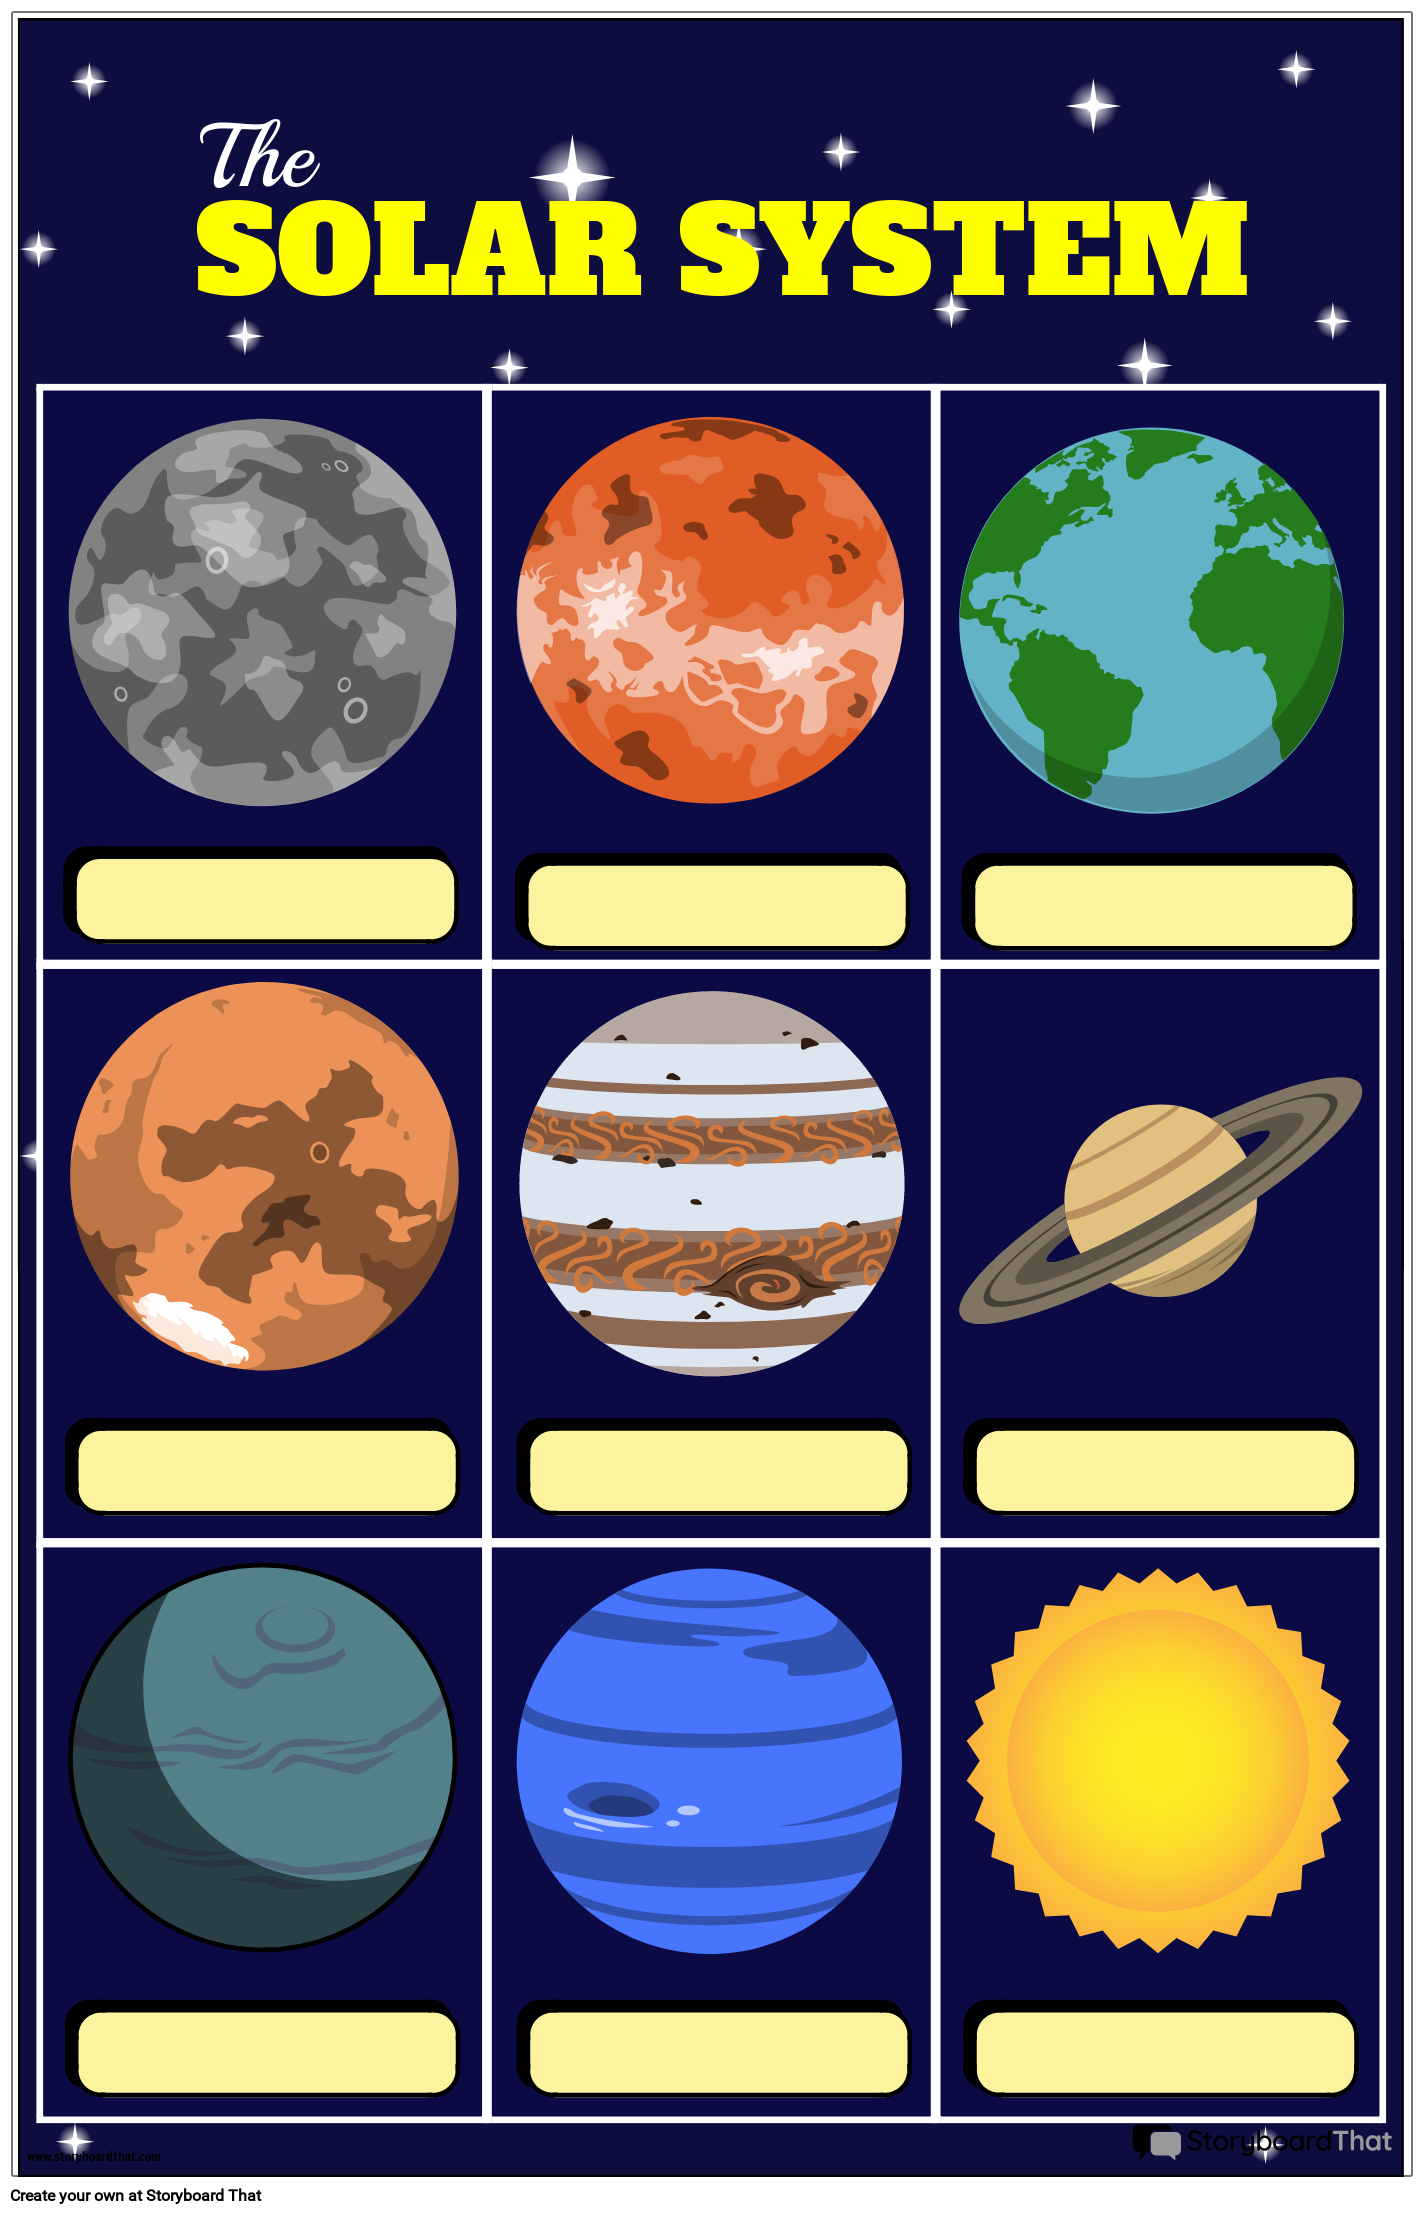 A diagram of the planets in our solar system with the sun, planets names  and space background